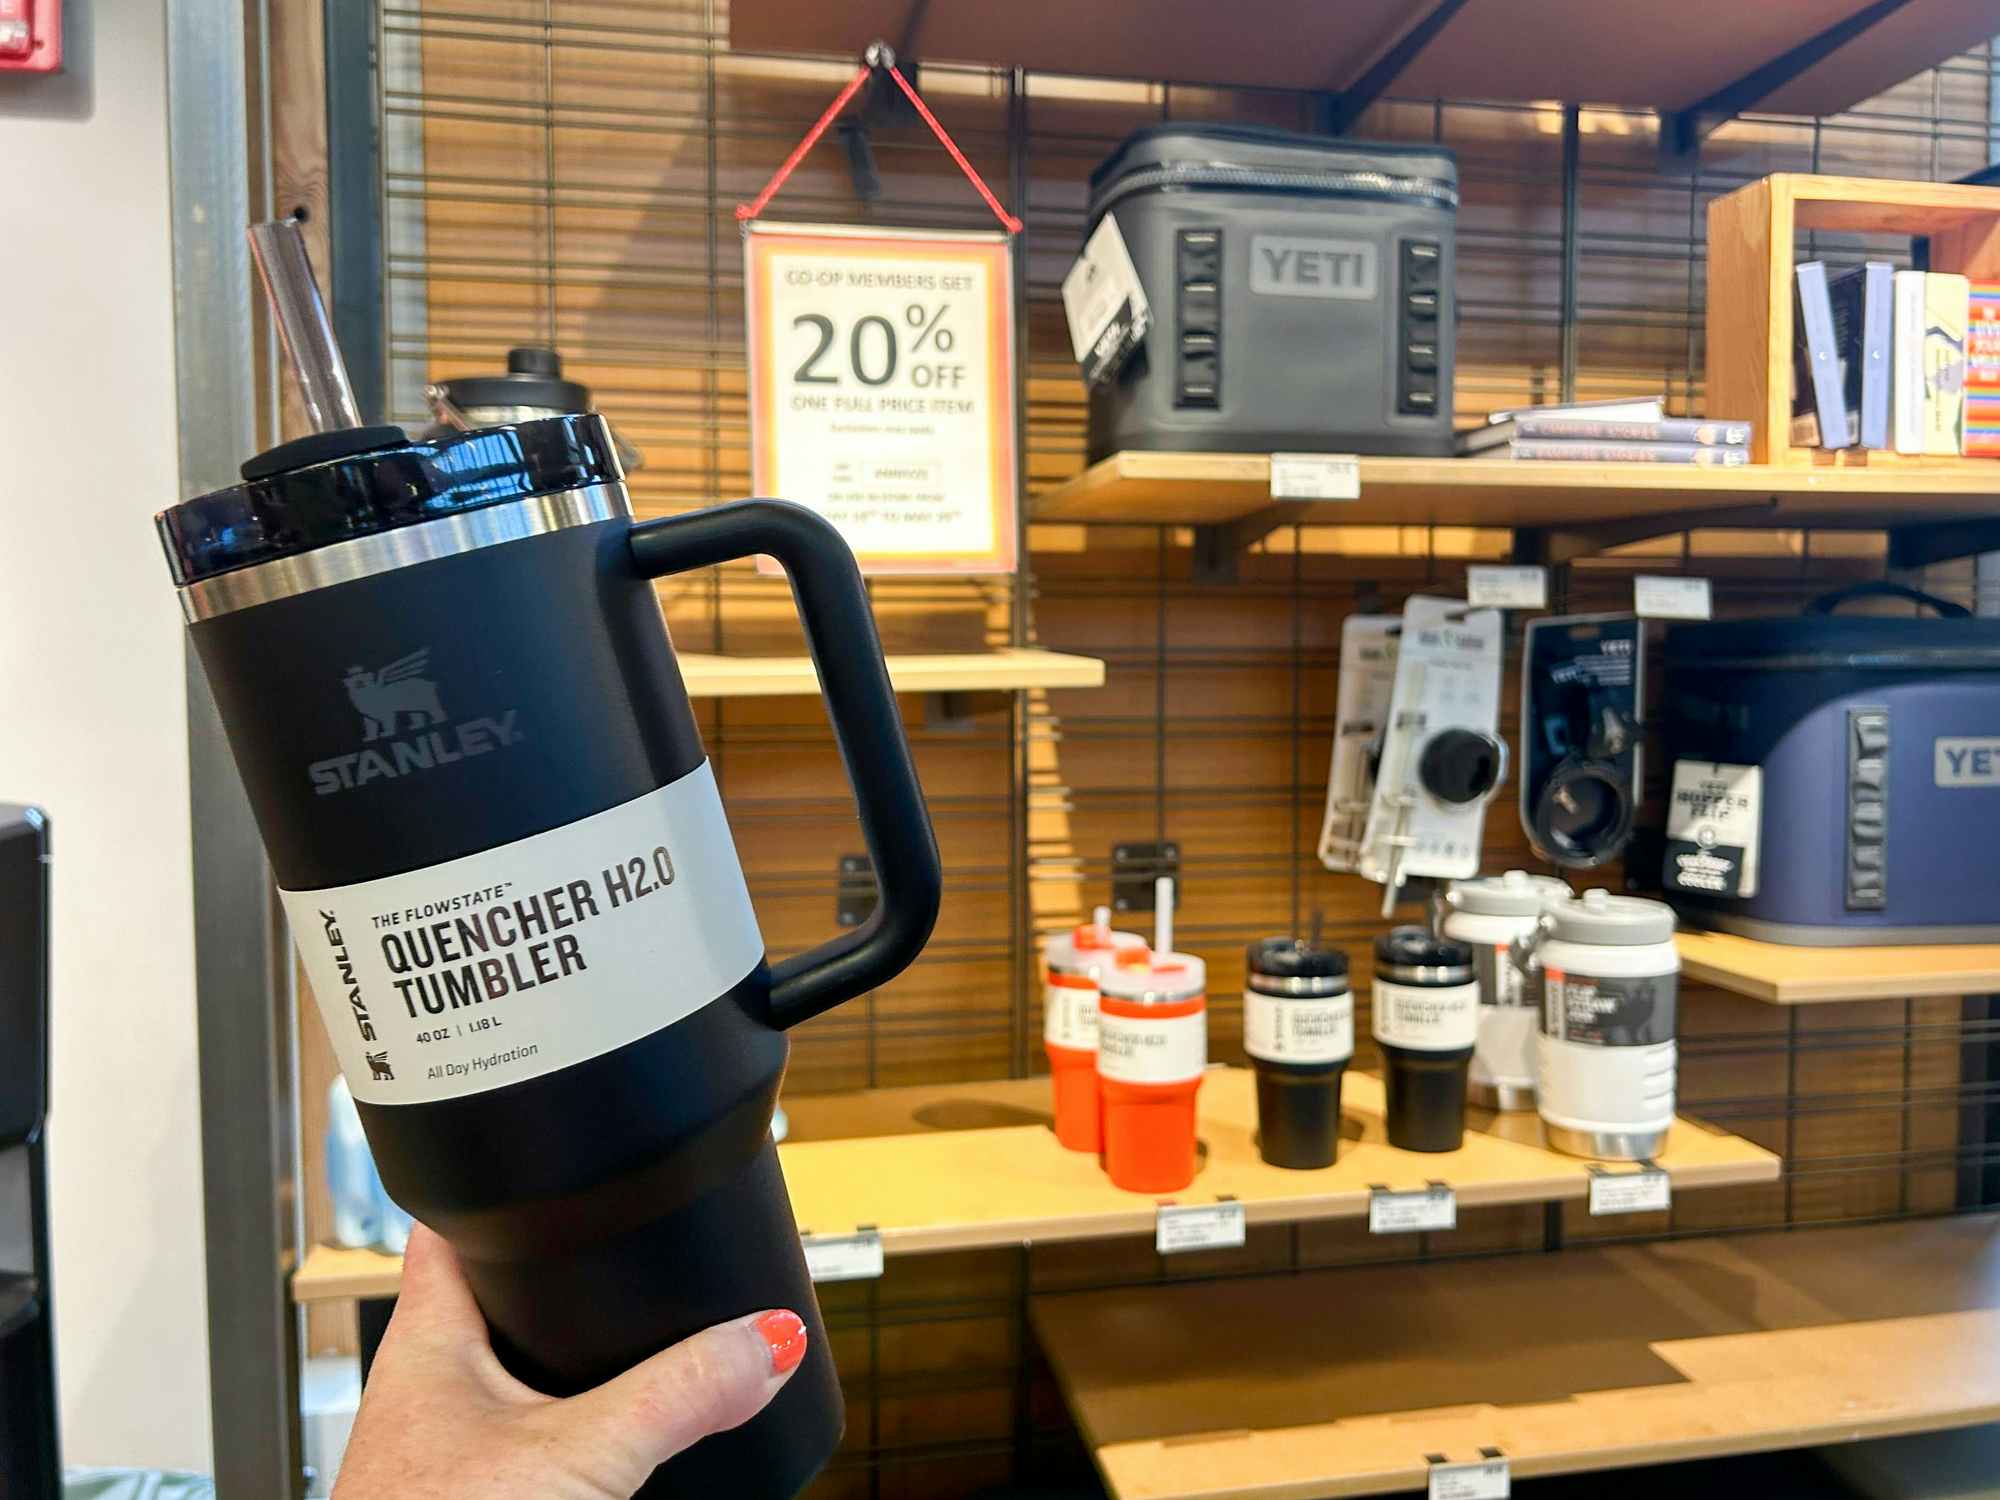 https://prod-cdn-thekrazycouponlady.imgix.net/wp-content/uploads/2023/05/rei-coop-store-anniversary-sale-biggest-sale-of-the-year-stanley-tumbler-yeti-cups-kcl-19-1684934727-1684934728.jpg?auto=format&fit=fill&q=25